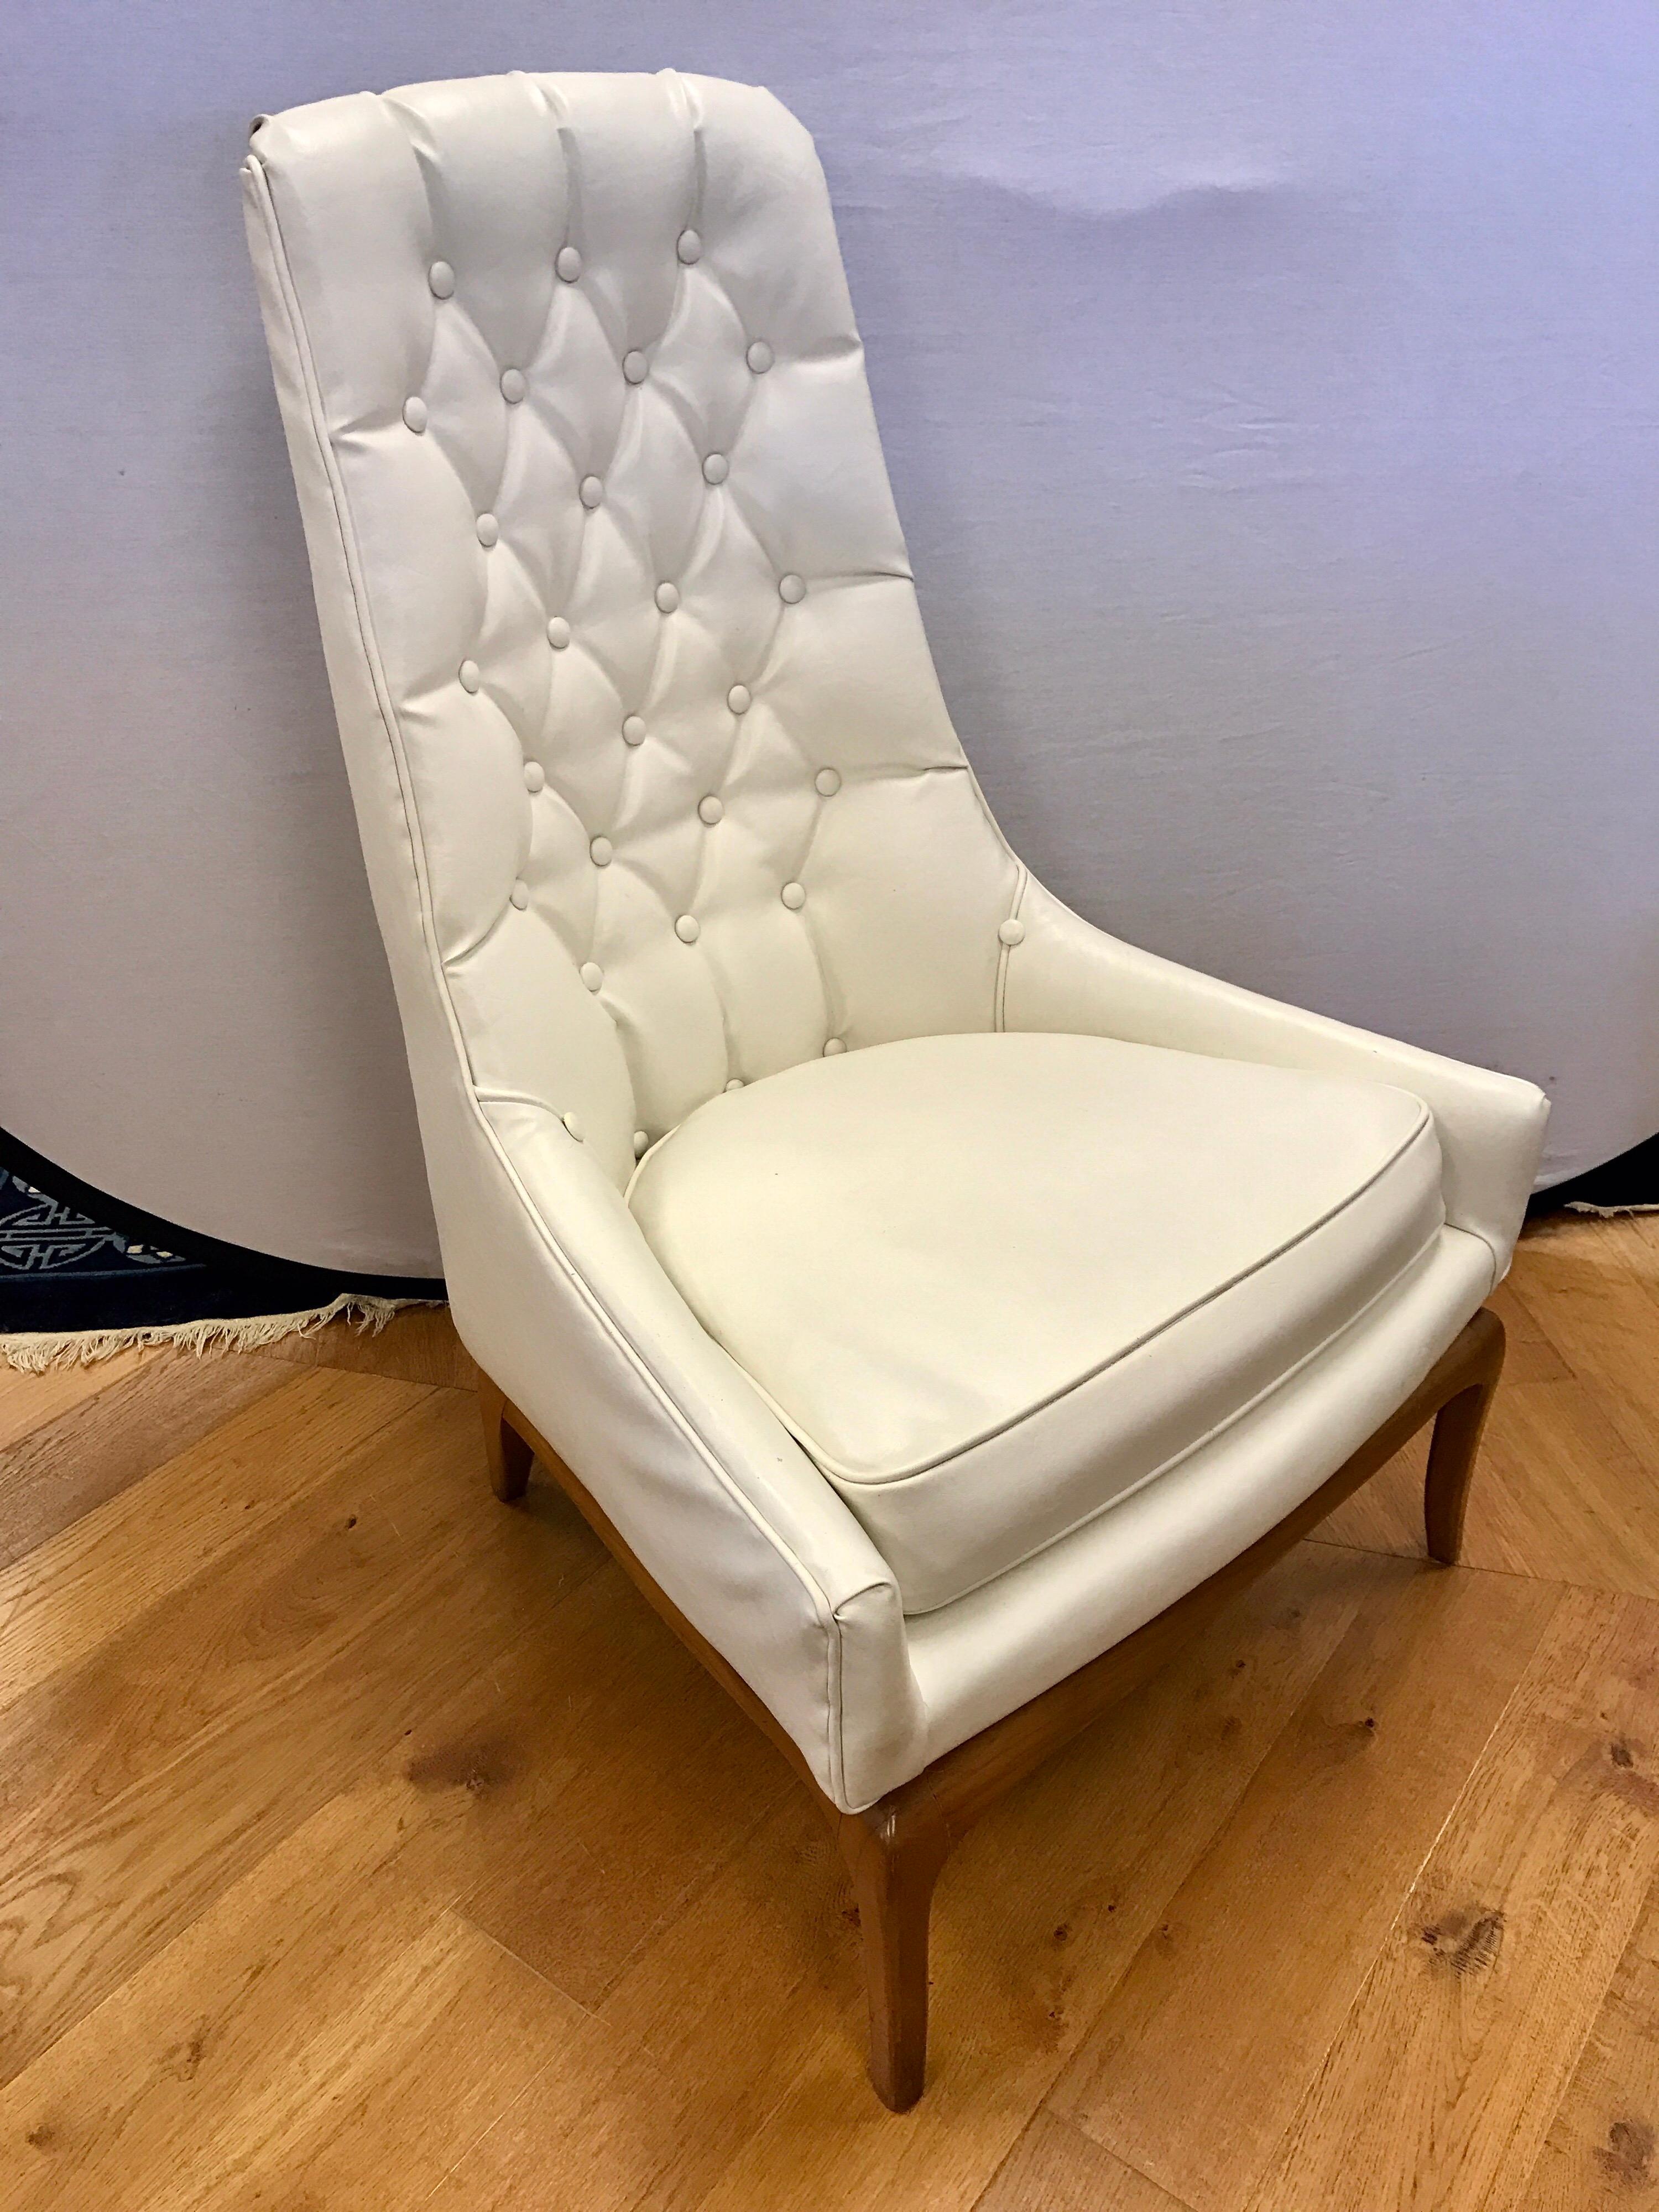 Widdicomb chair in original white faux leather fabric from the 1950's. Most of the tag has fallen off but we believe it to be T.H. Robsjohn-Gibbings designed based on tag present and workmanship/design. The fabric is in decent shape but there are